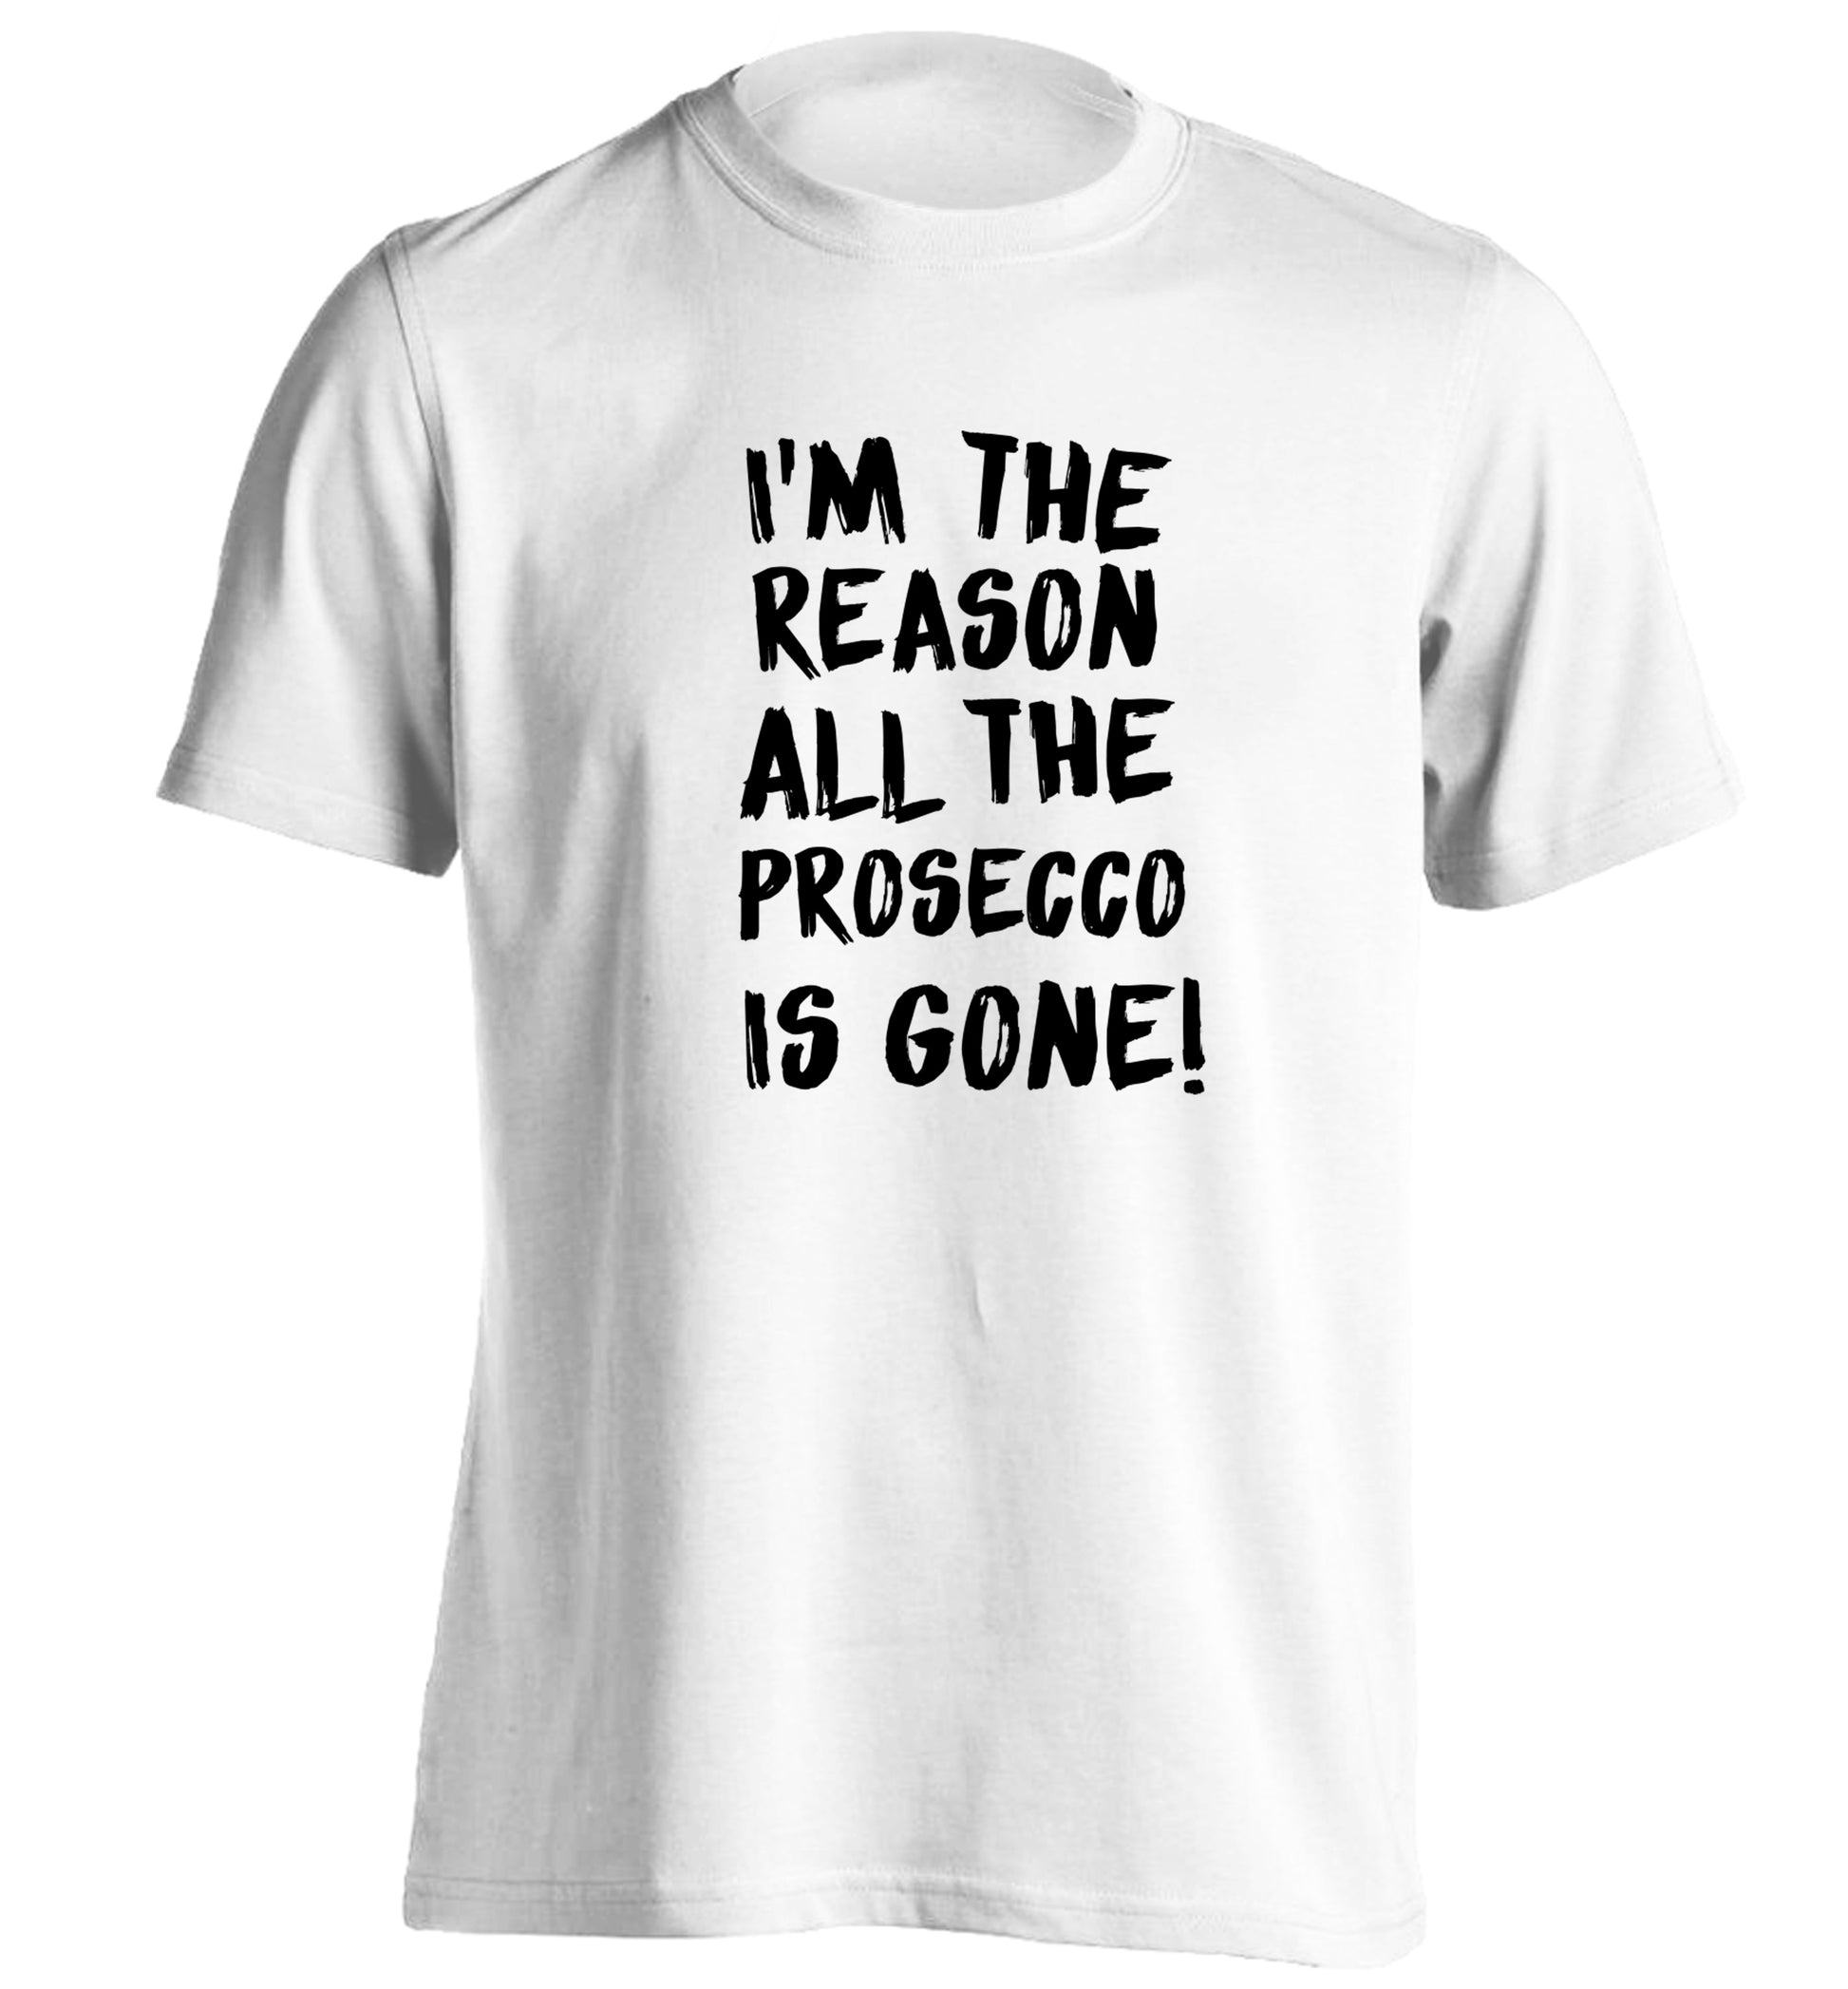 I'm the reason all the prosecco is gone adults unisex white Tshirt 2XL